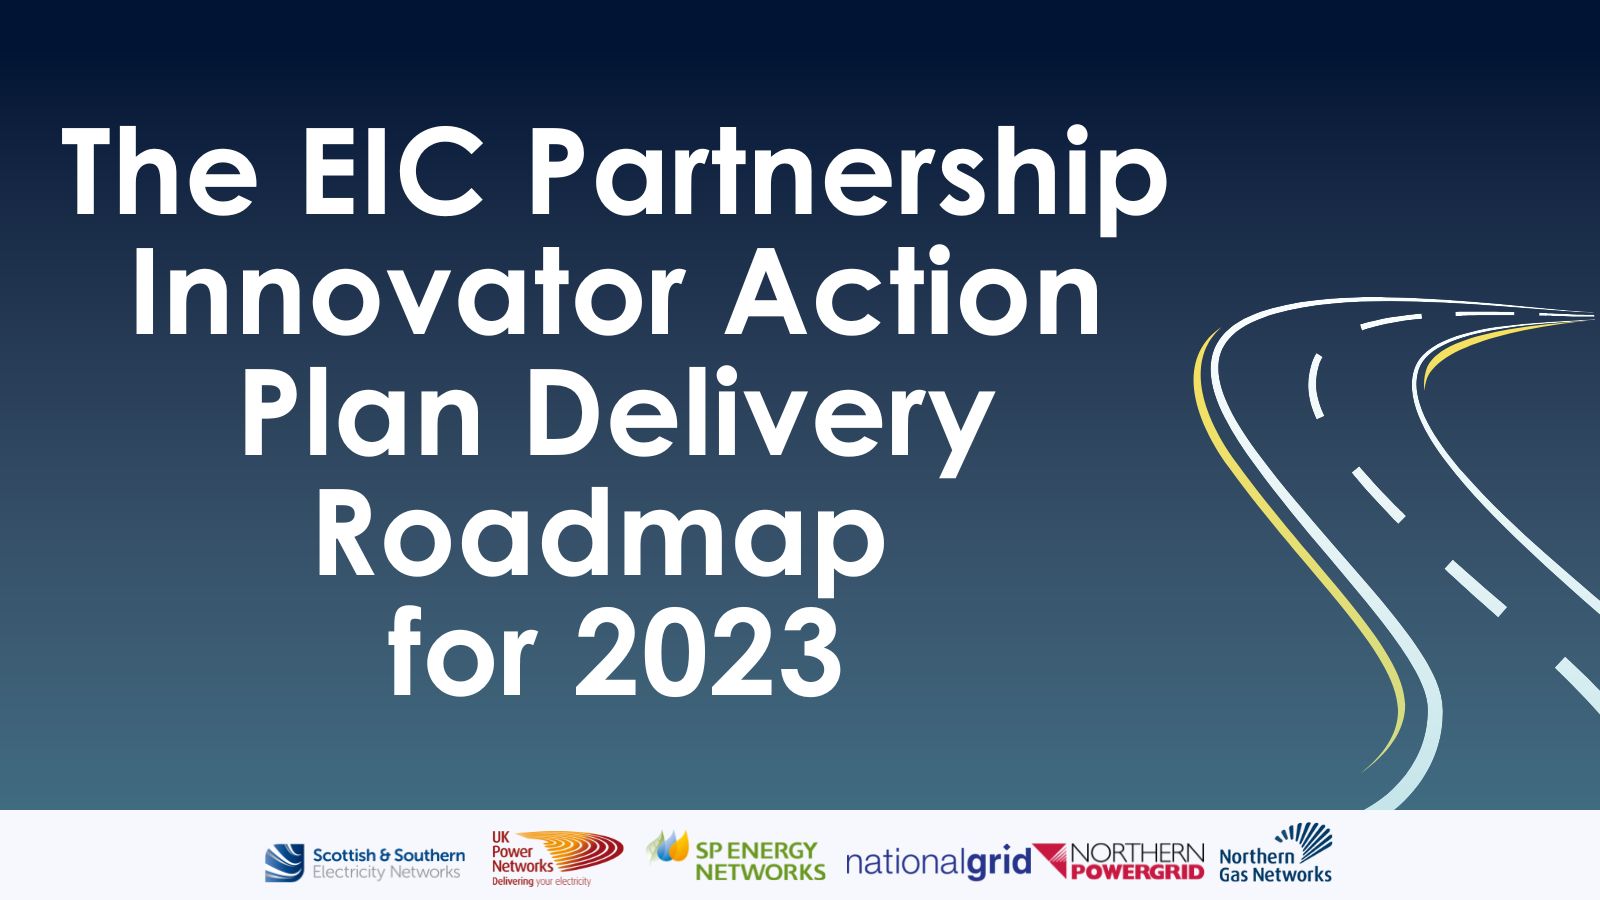 The EIC Partnership Innovator Action Plan Delivery Roadmap for 2023